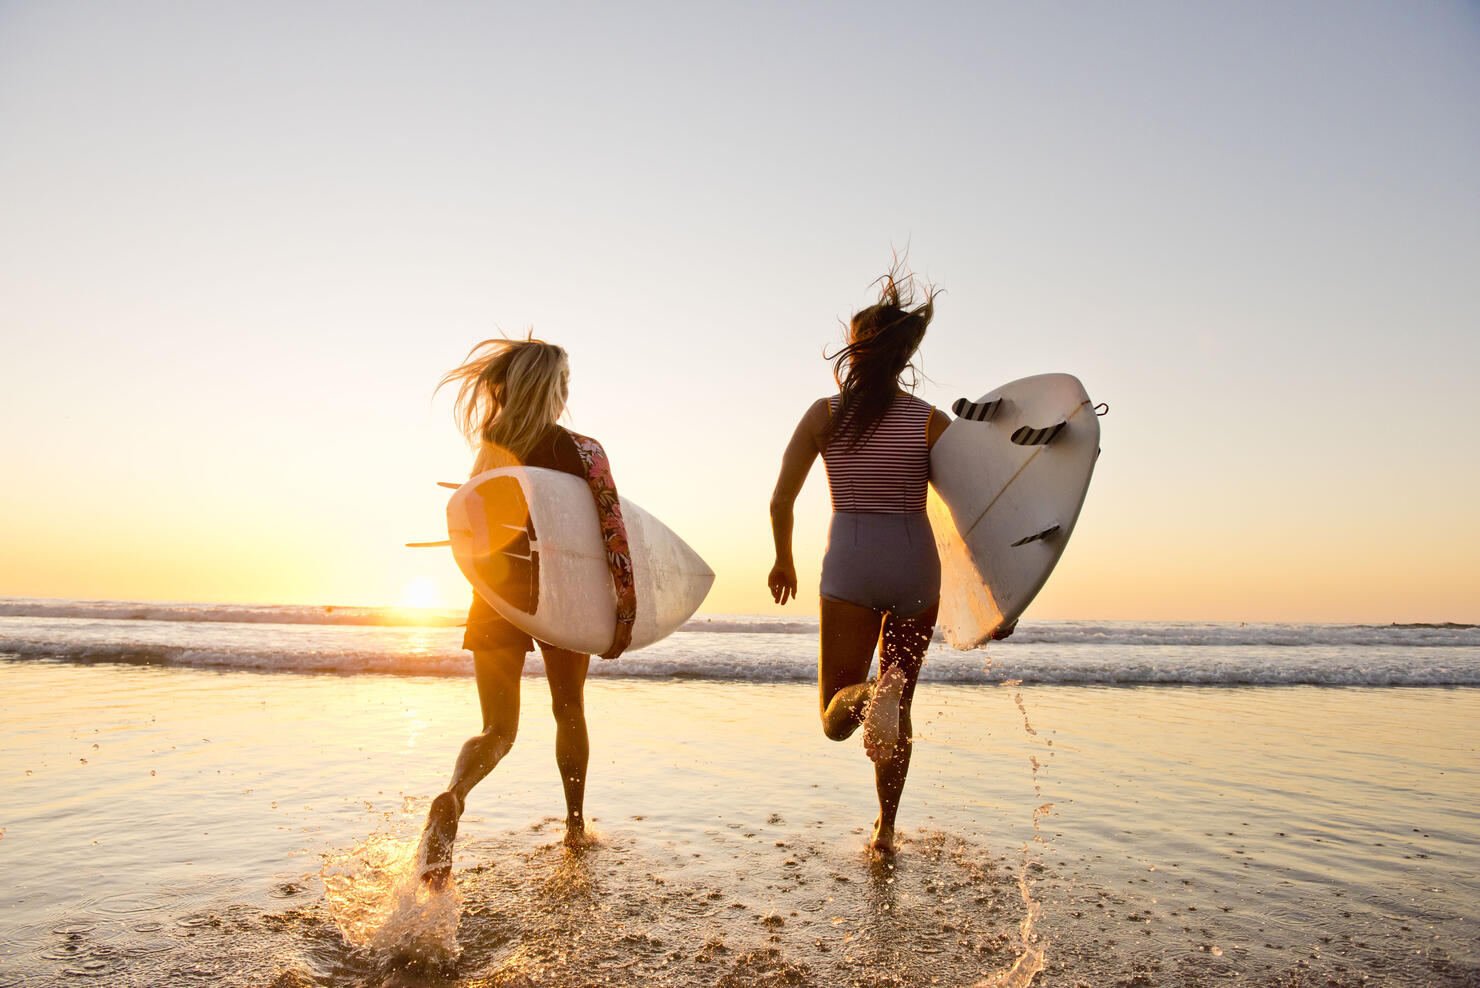 female surfers running on the beach at sunset